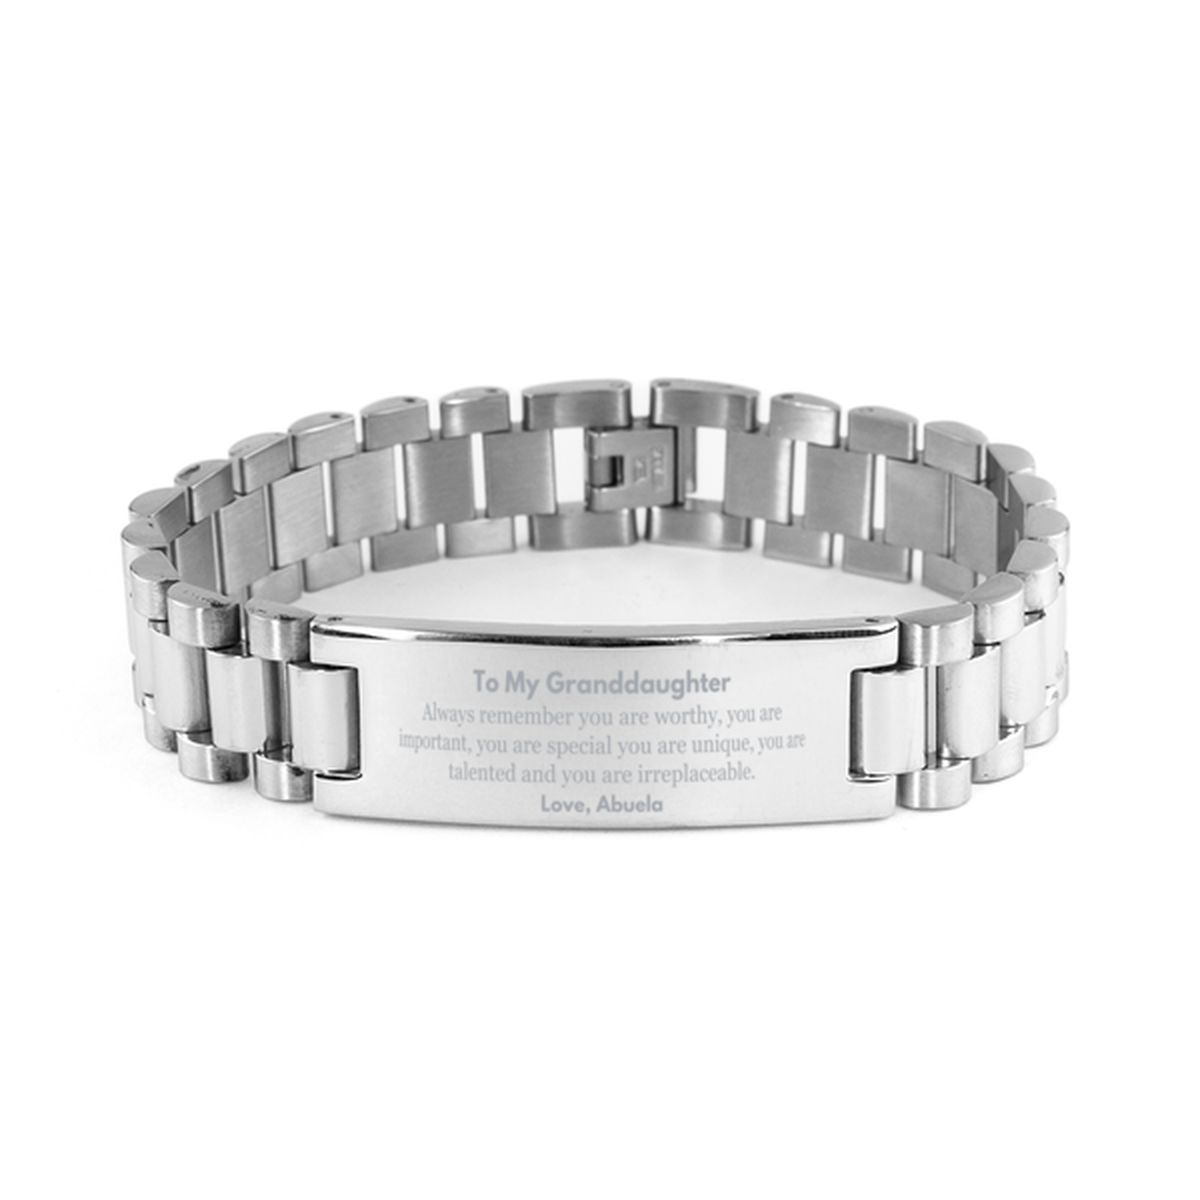 Granddaughter Birthday Gifts from Abuela, Inspirational Ladder Stainless Steel Bracelet for Granddaughter Christmas Graduation Gifts for Granddaughter Always remember you are worthy, you are important. Love, Abuela